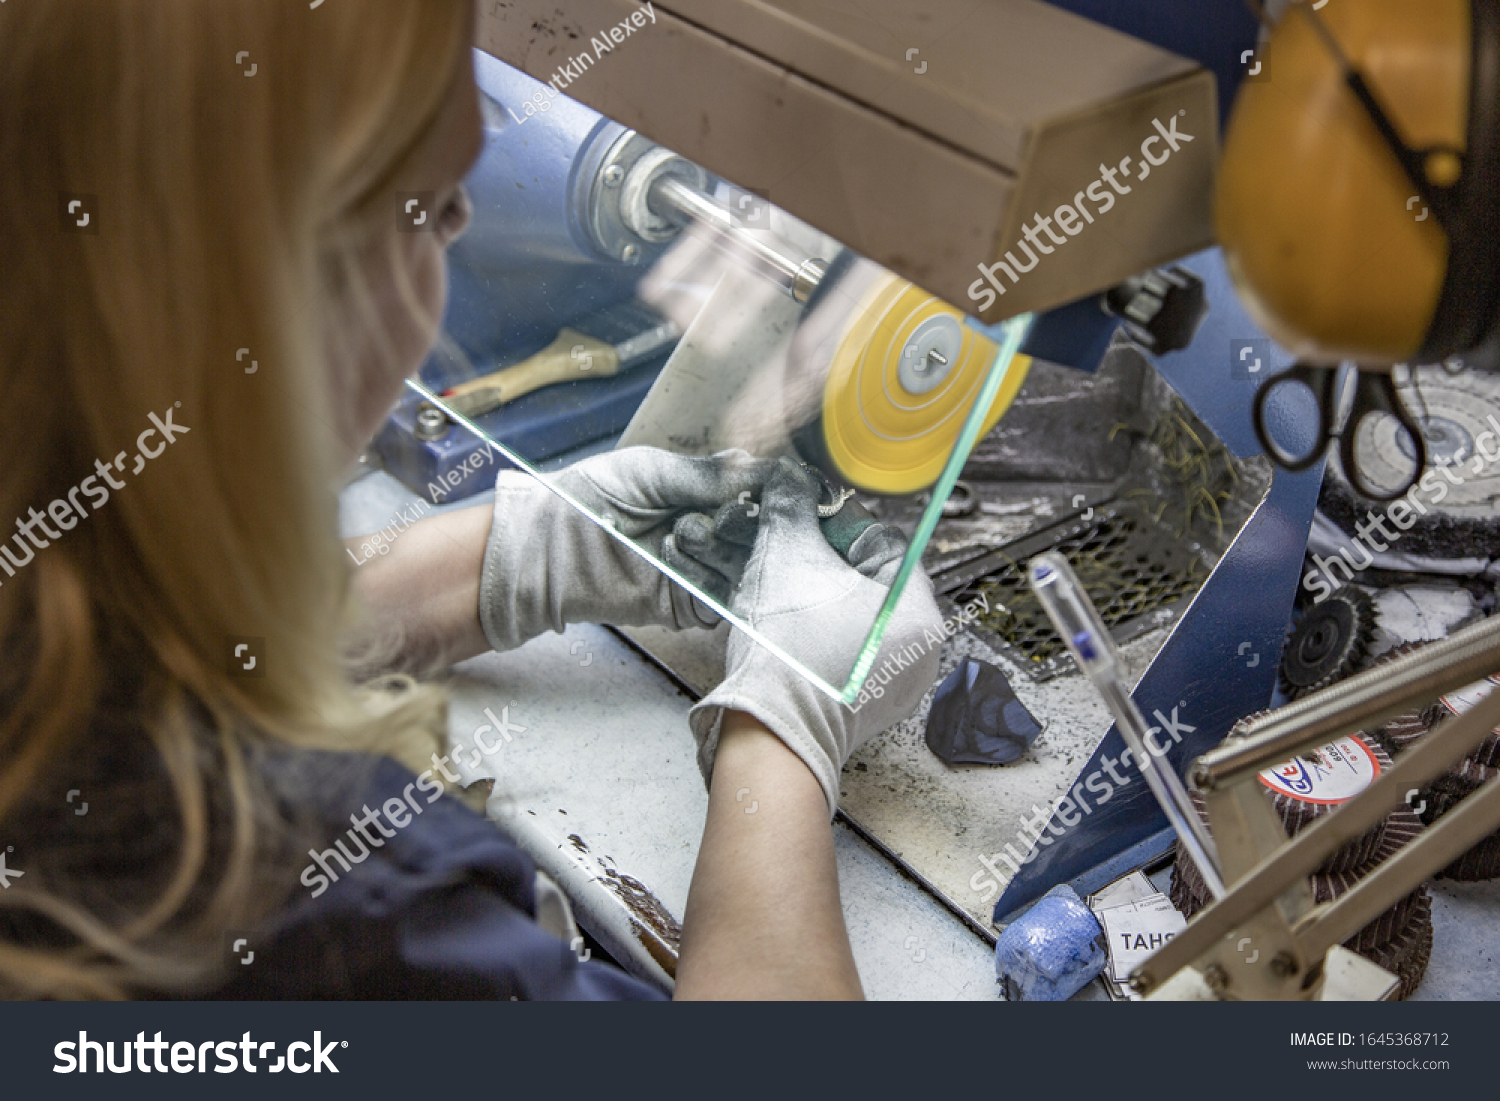 stock-photo-moscow-russia-february-industrial-workshop-of-the-watch-factory-nika-manufacture-of-1645368712.jpg